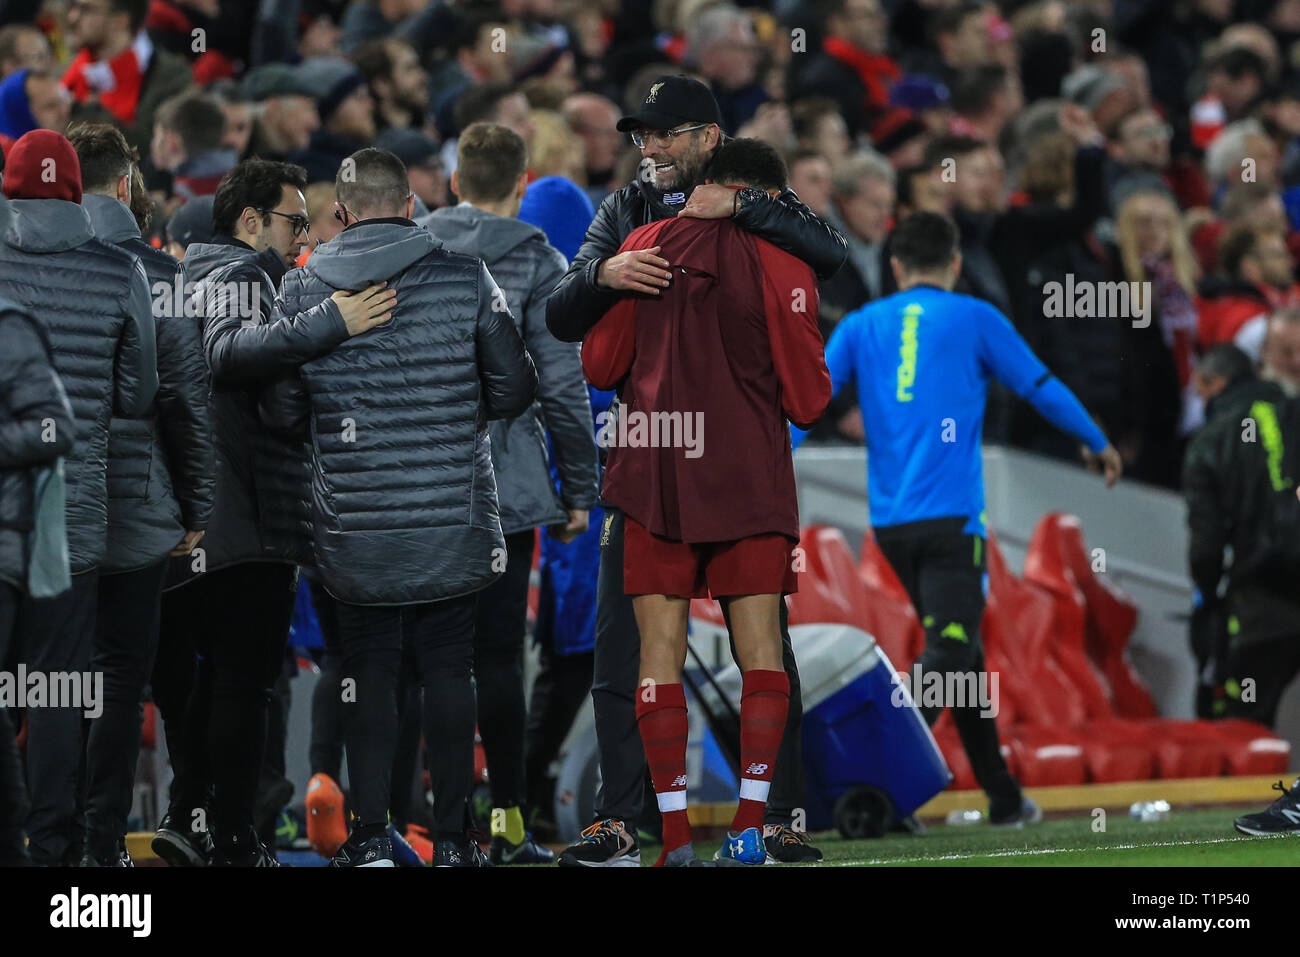 Liverpool FC - That first hug from the boss 🤗